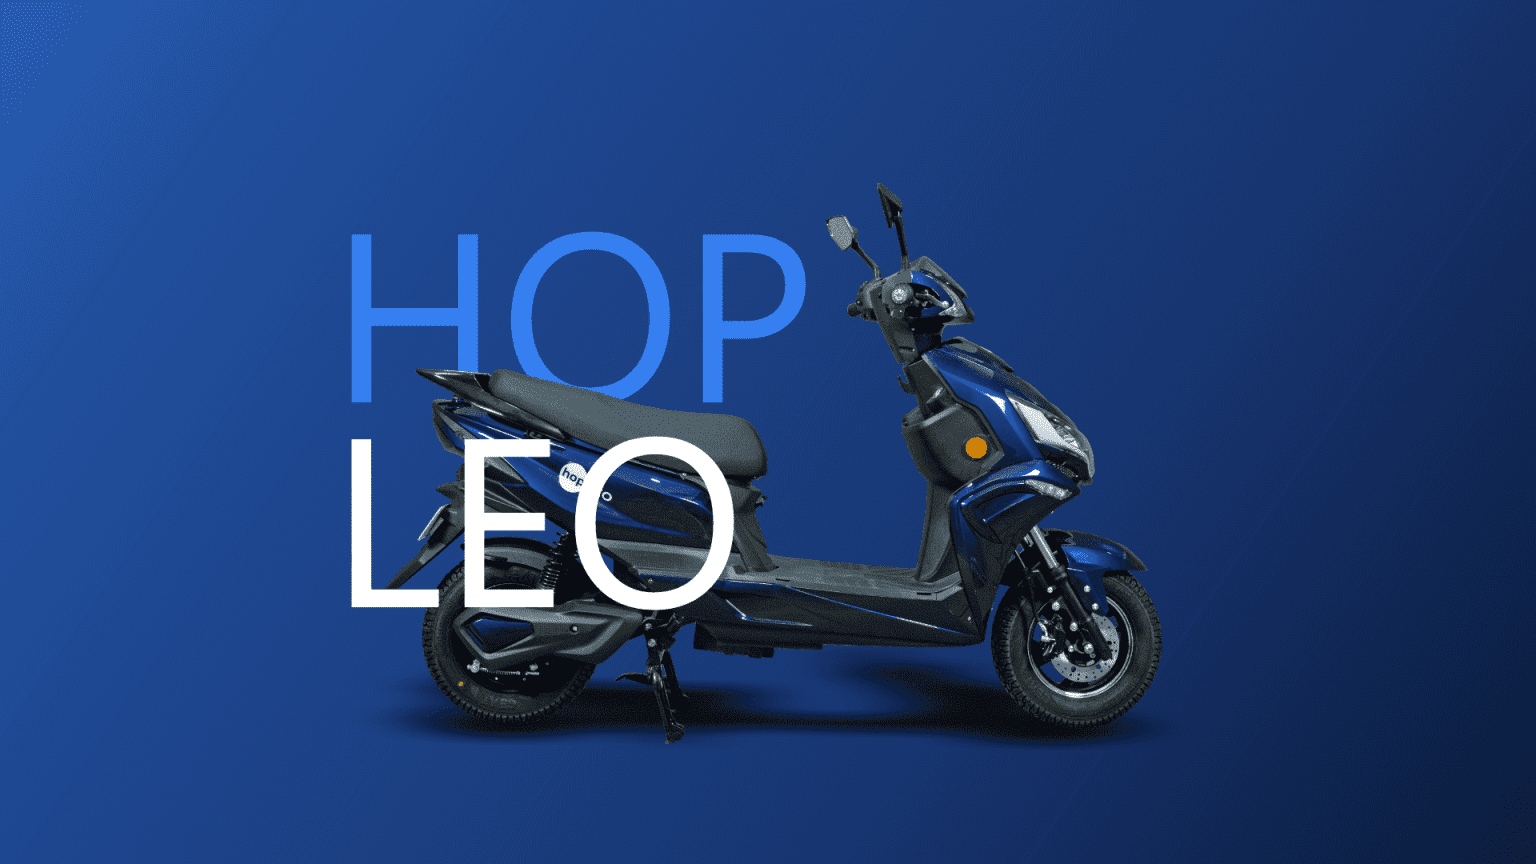 Hop Electric launched Affordable Electric Scooter "Hop Leo"